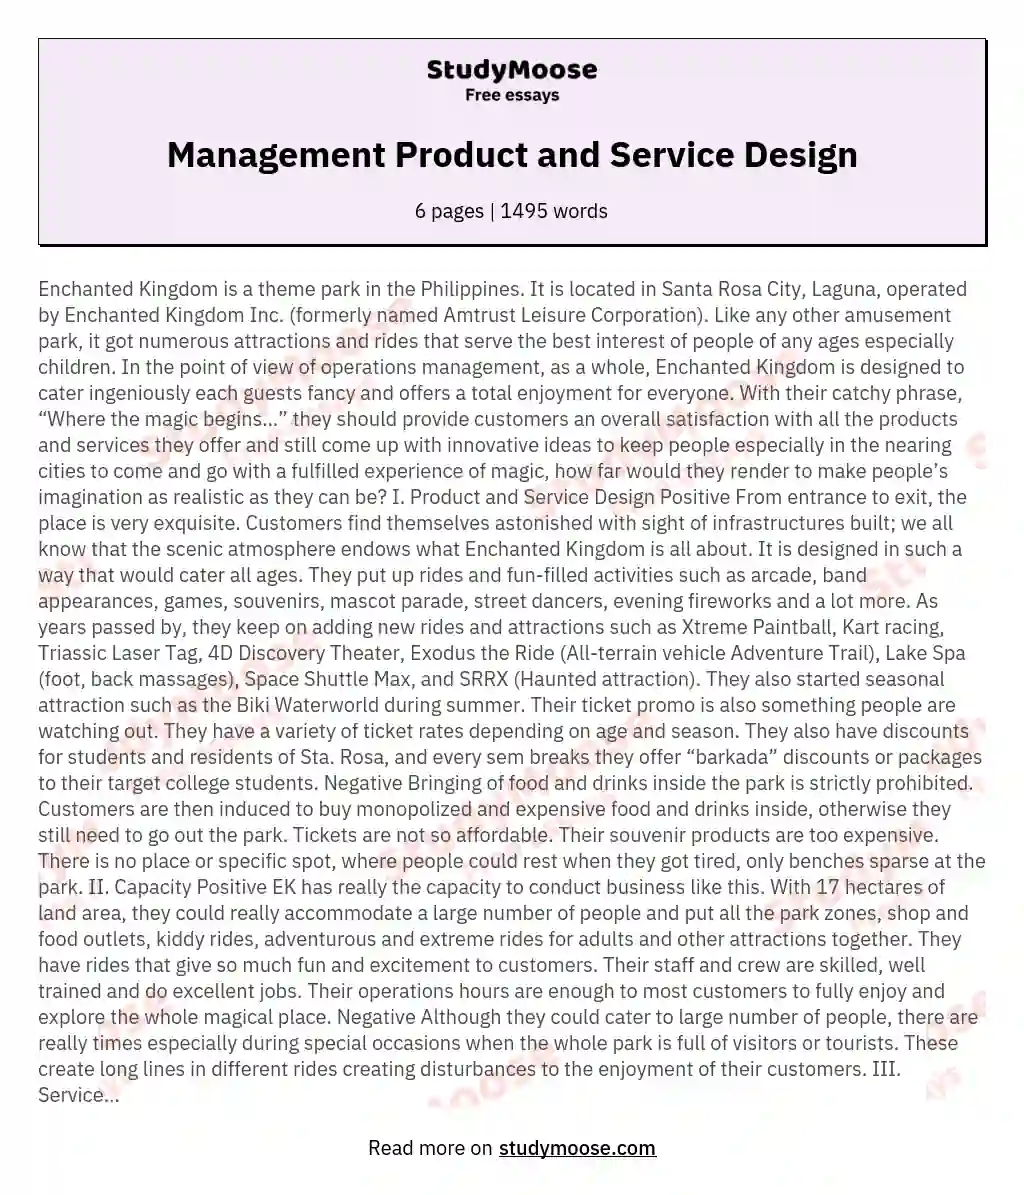 Management Product and Service Design essay